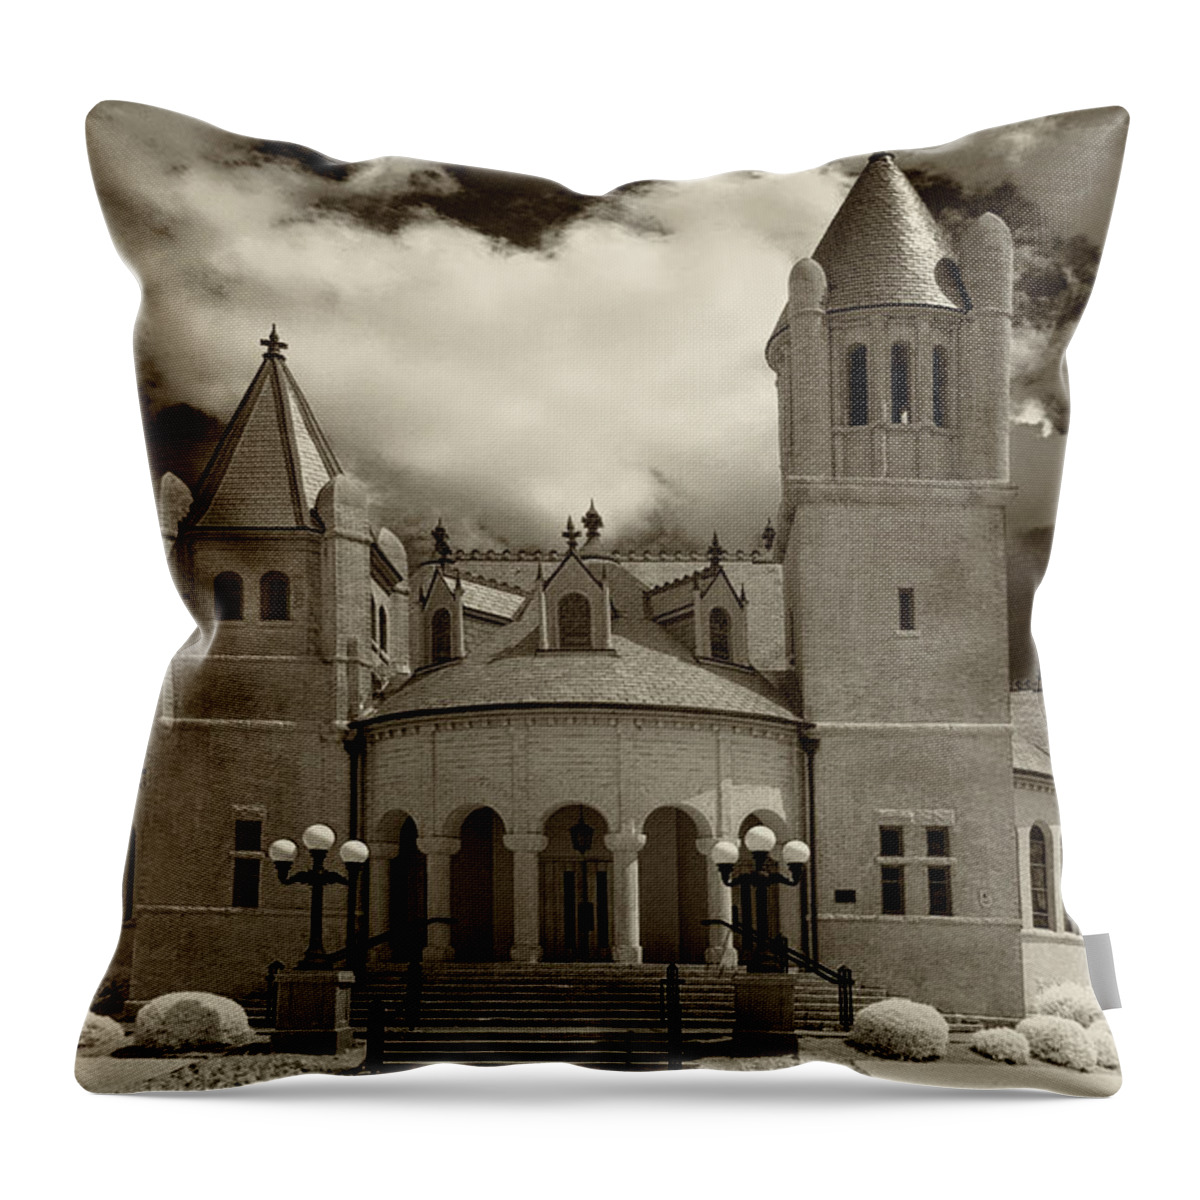 Infrared Throw Pillow featuring the photograph Centenary United Methodist Church by Anthony M Davis